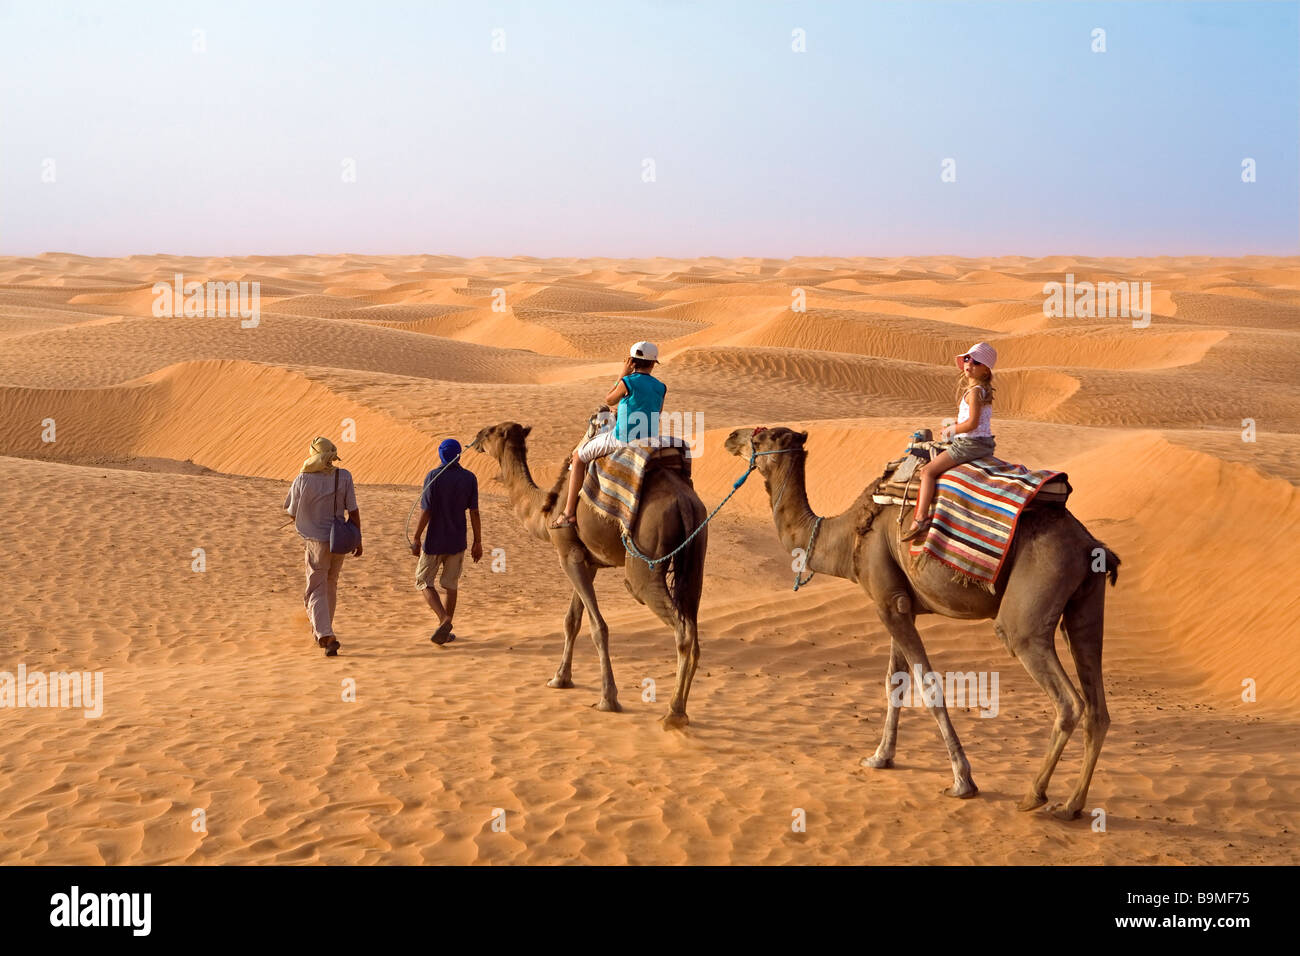 Tunisia, South-side, Ksar Ghilane oasis, Dromadery ride in the sand dunes Stock Photo